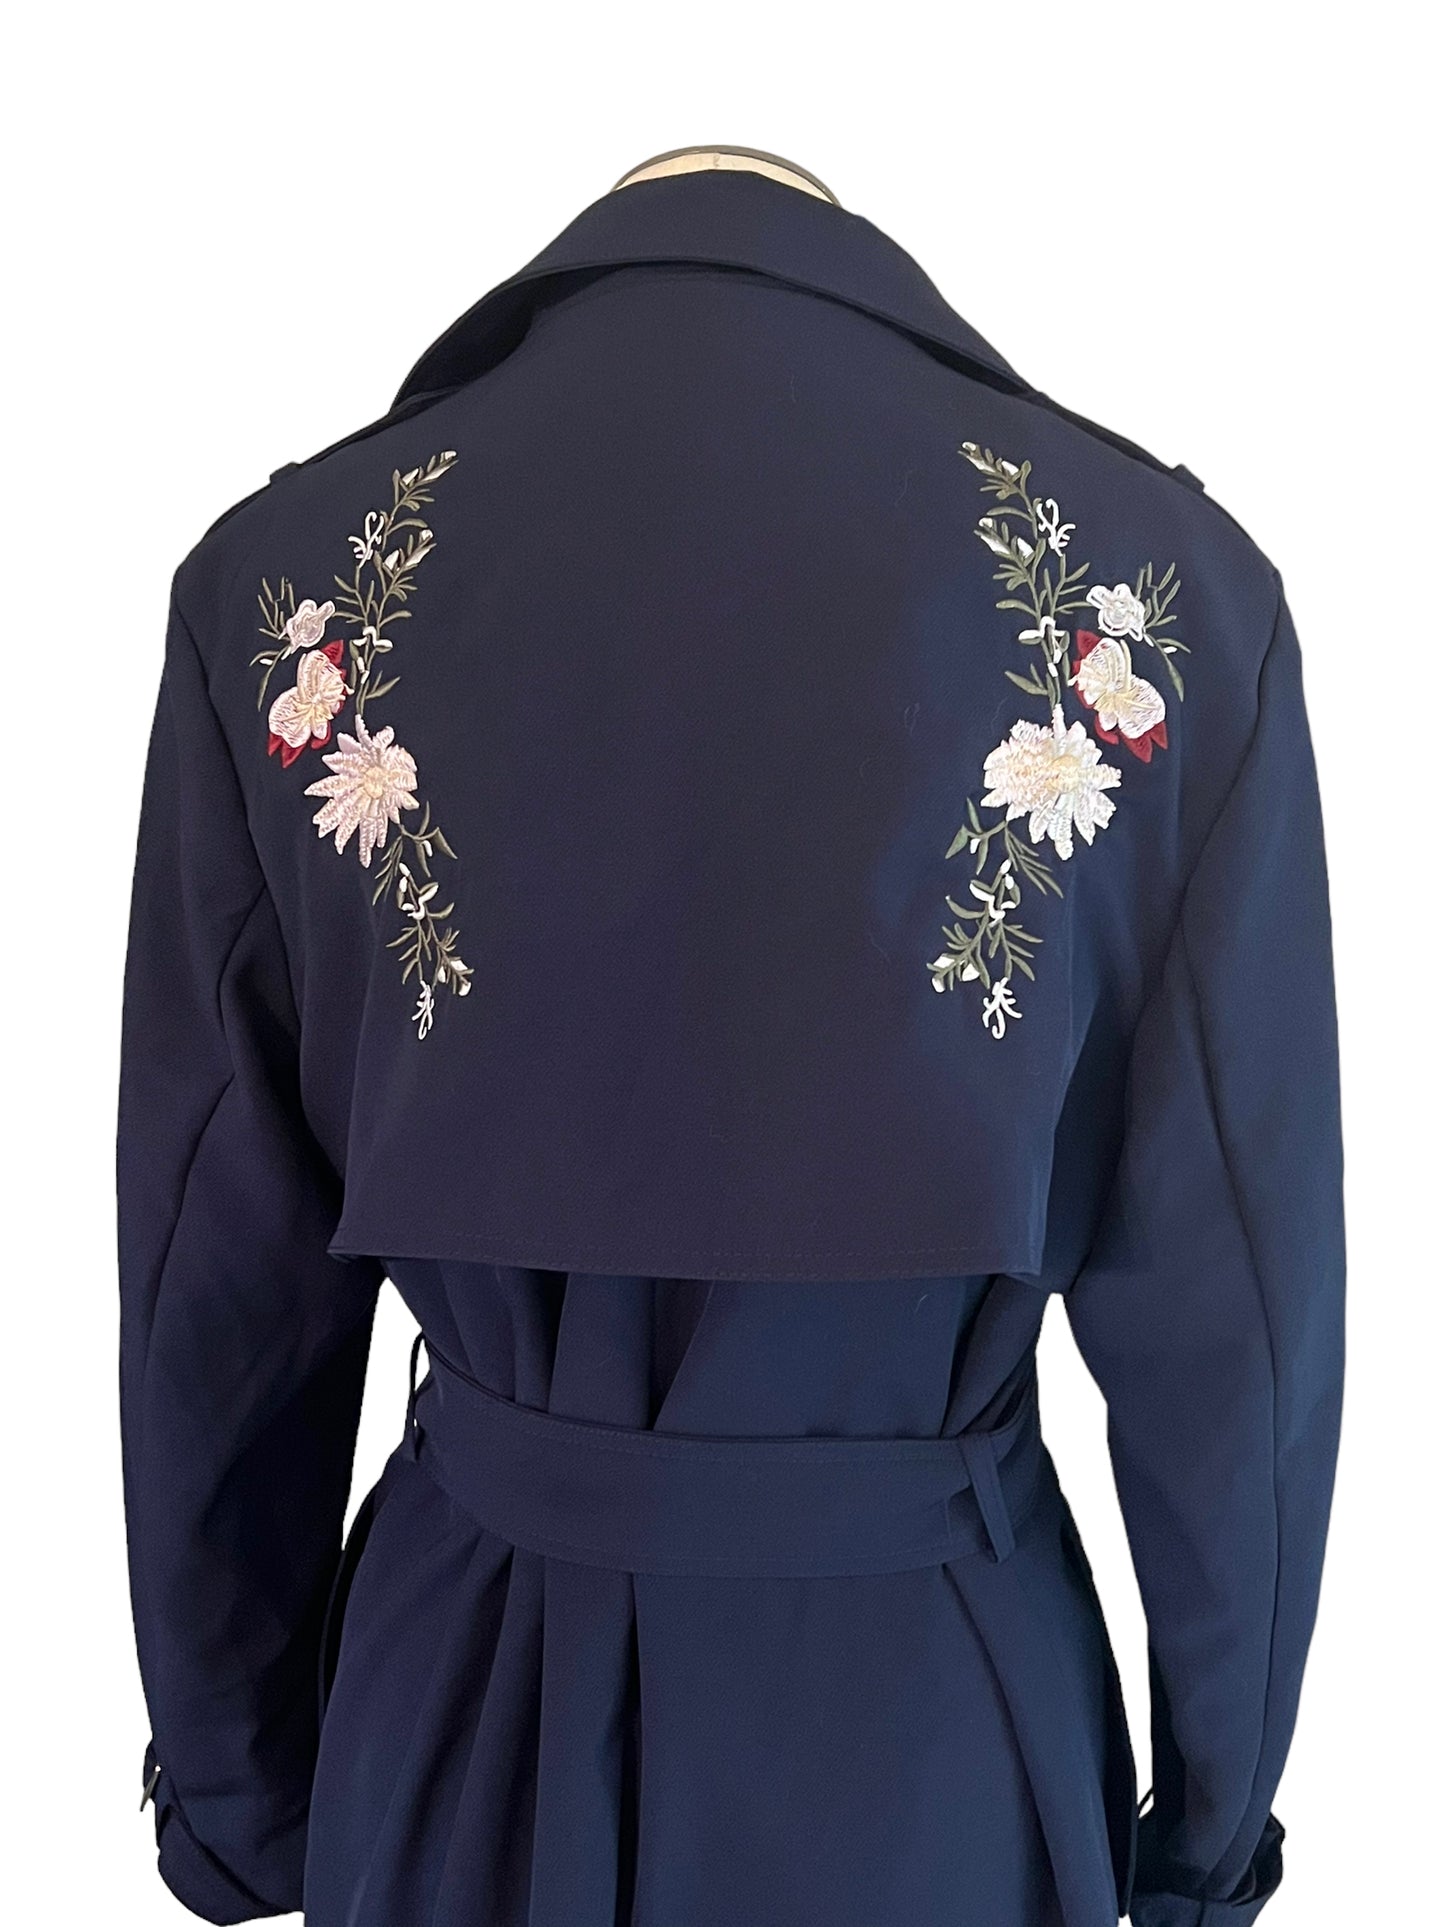 Vero Moda Classic Size M/L Navy Candy Embroidered Floral Trench Coat